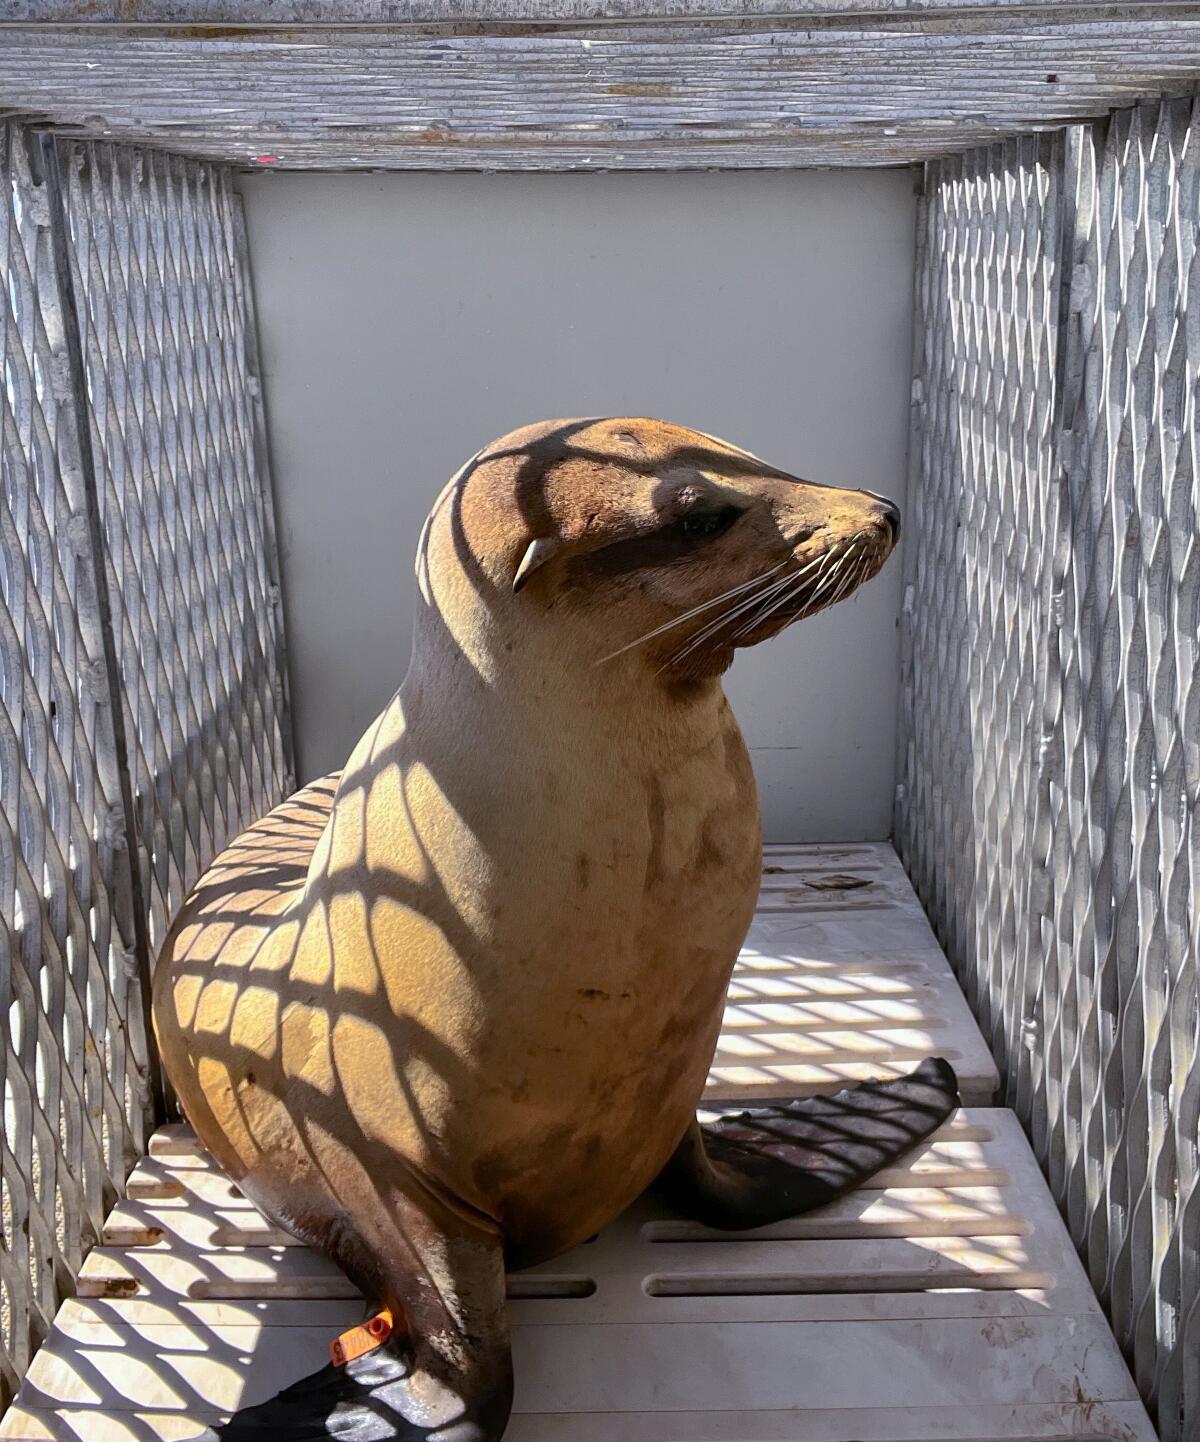 On board SeaWorld’s boat off the coast of San Diego, a recent rescued sea lion, known as ZC2338 is taken out to be released